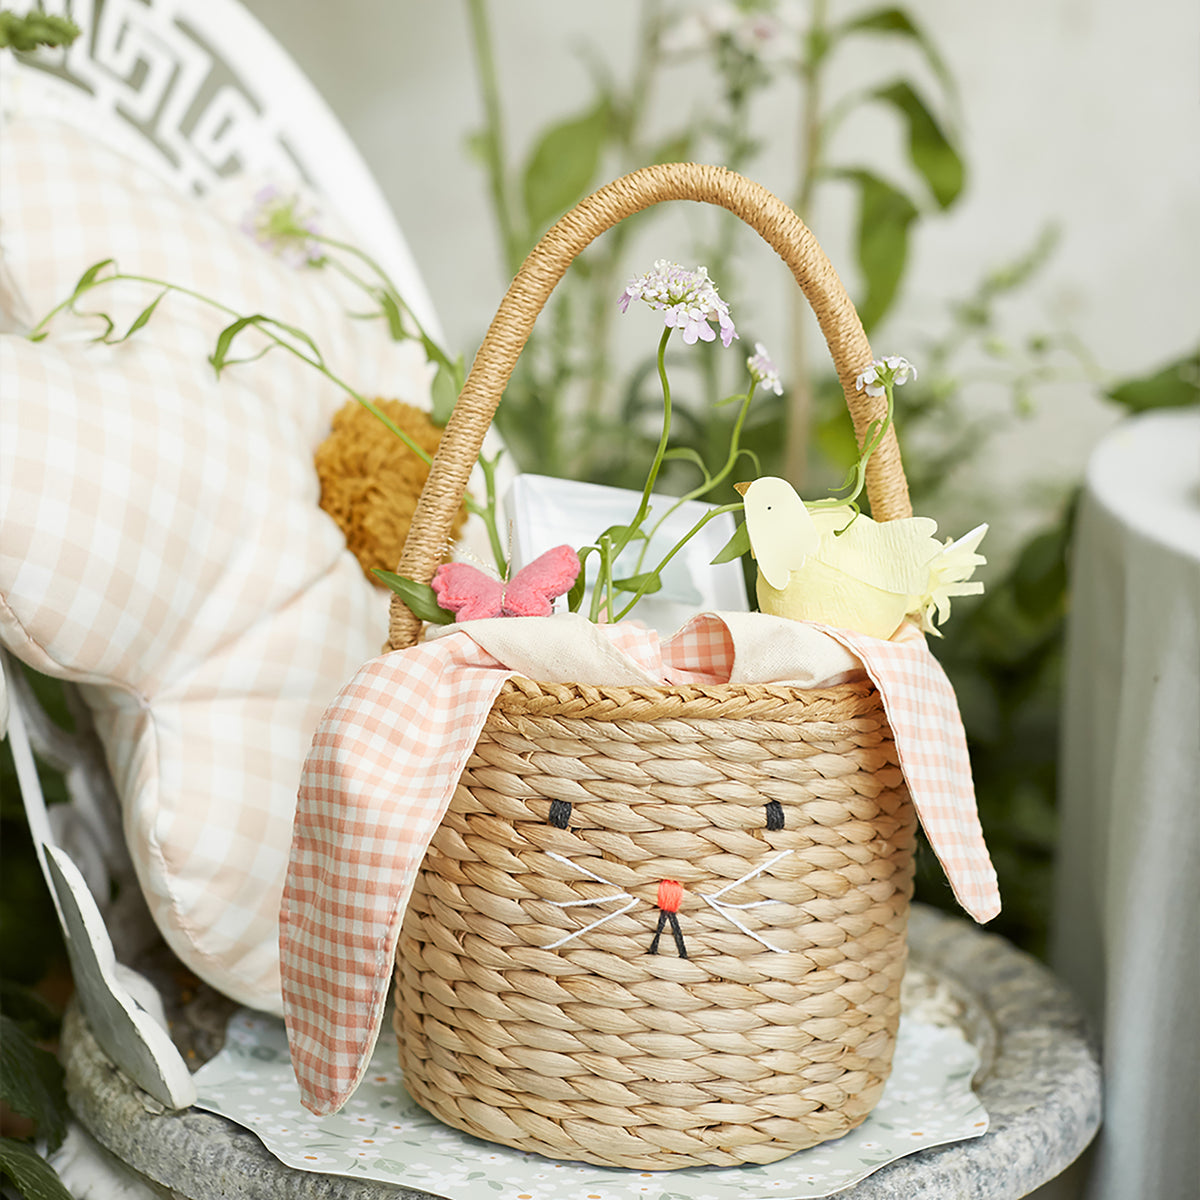 Adorable Red Button Eyed Straw Easter Basket Shaped Like a Bunny - Ruby Lane